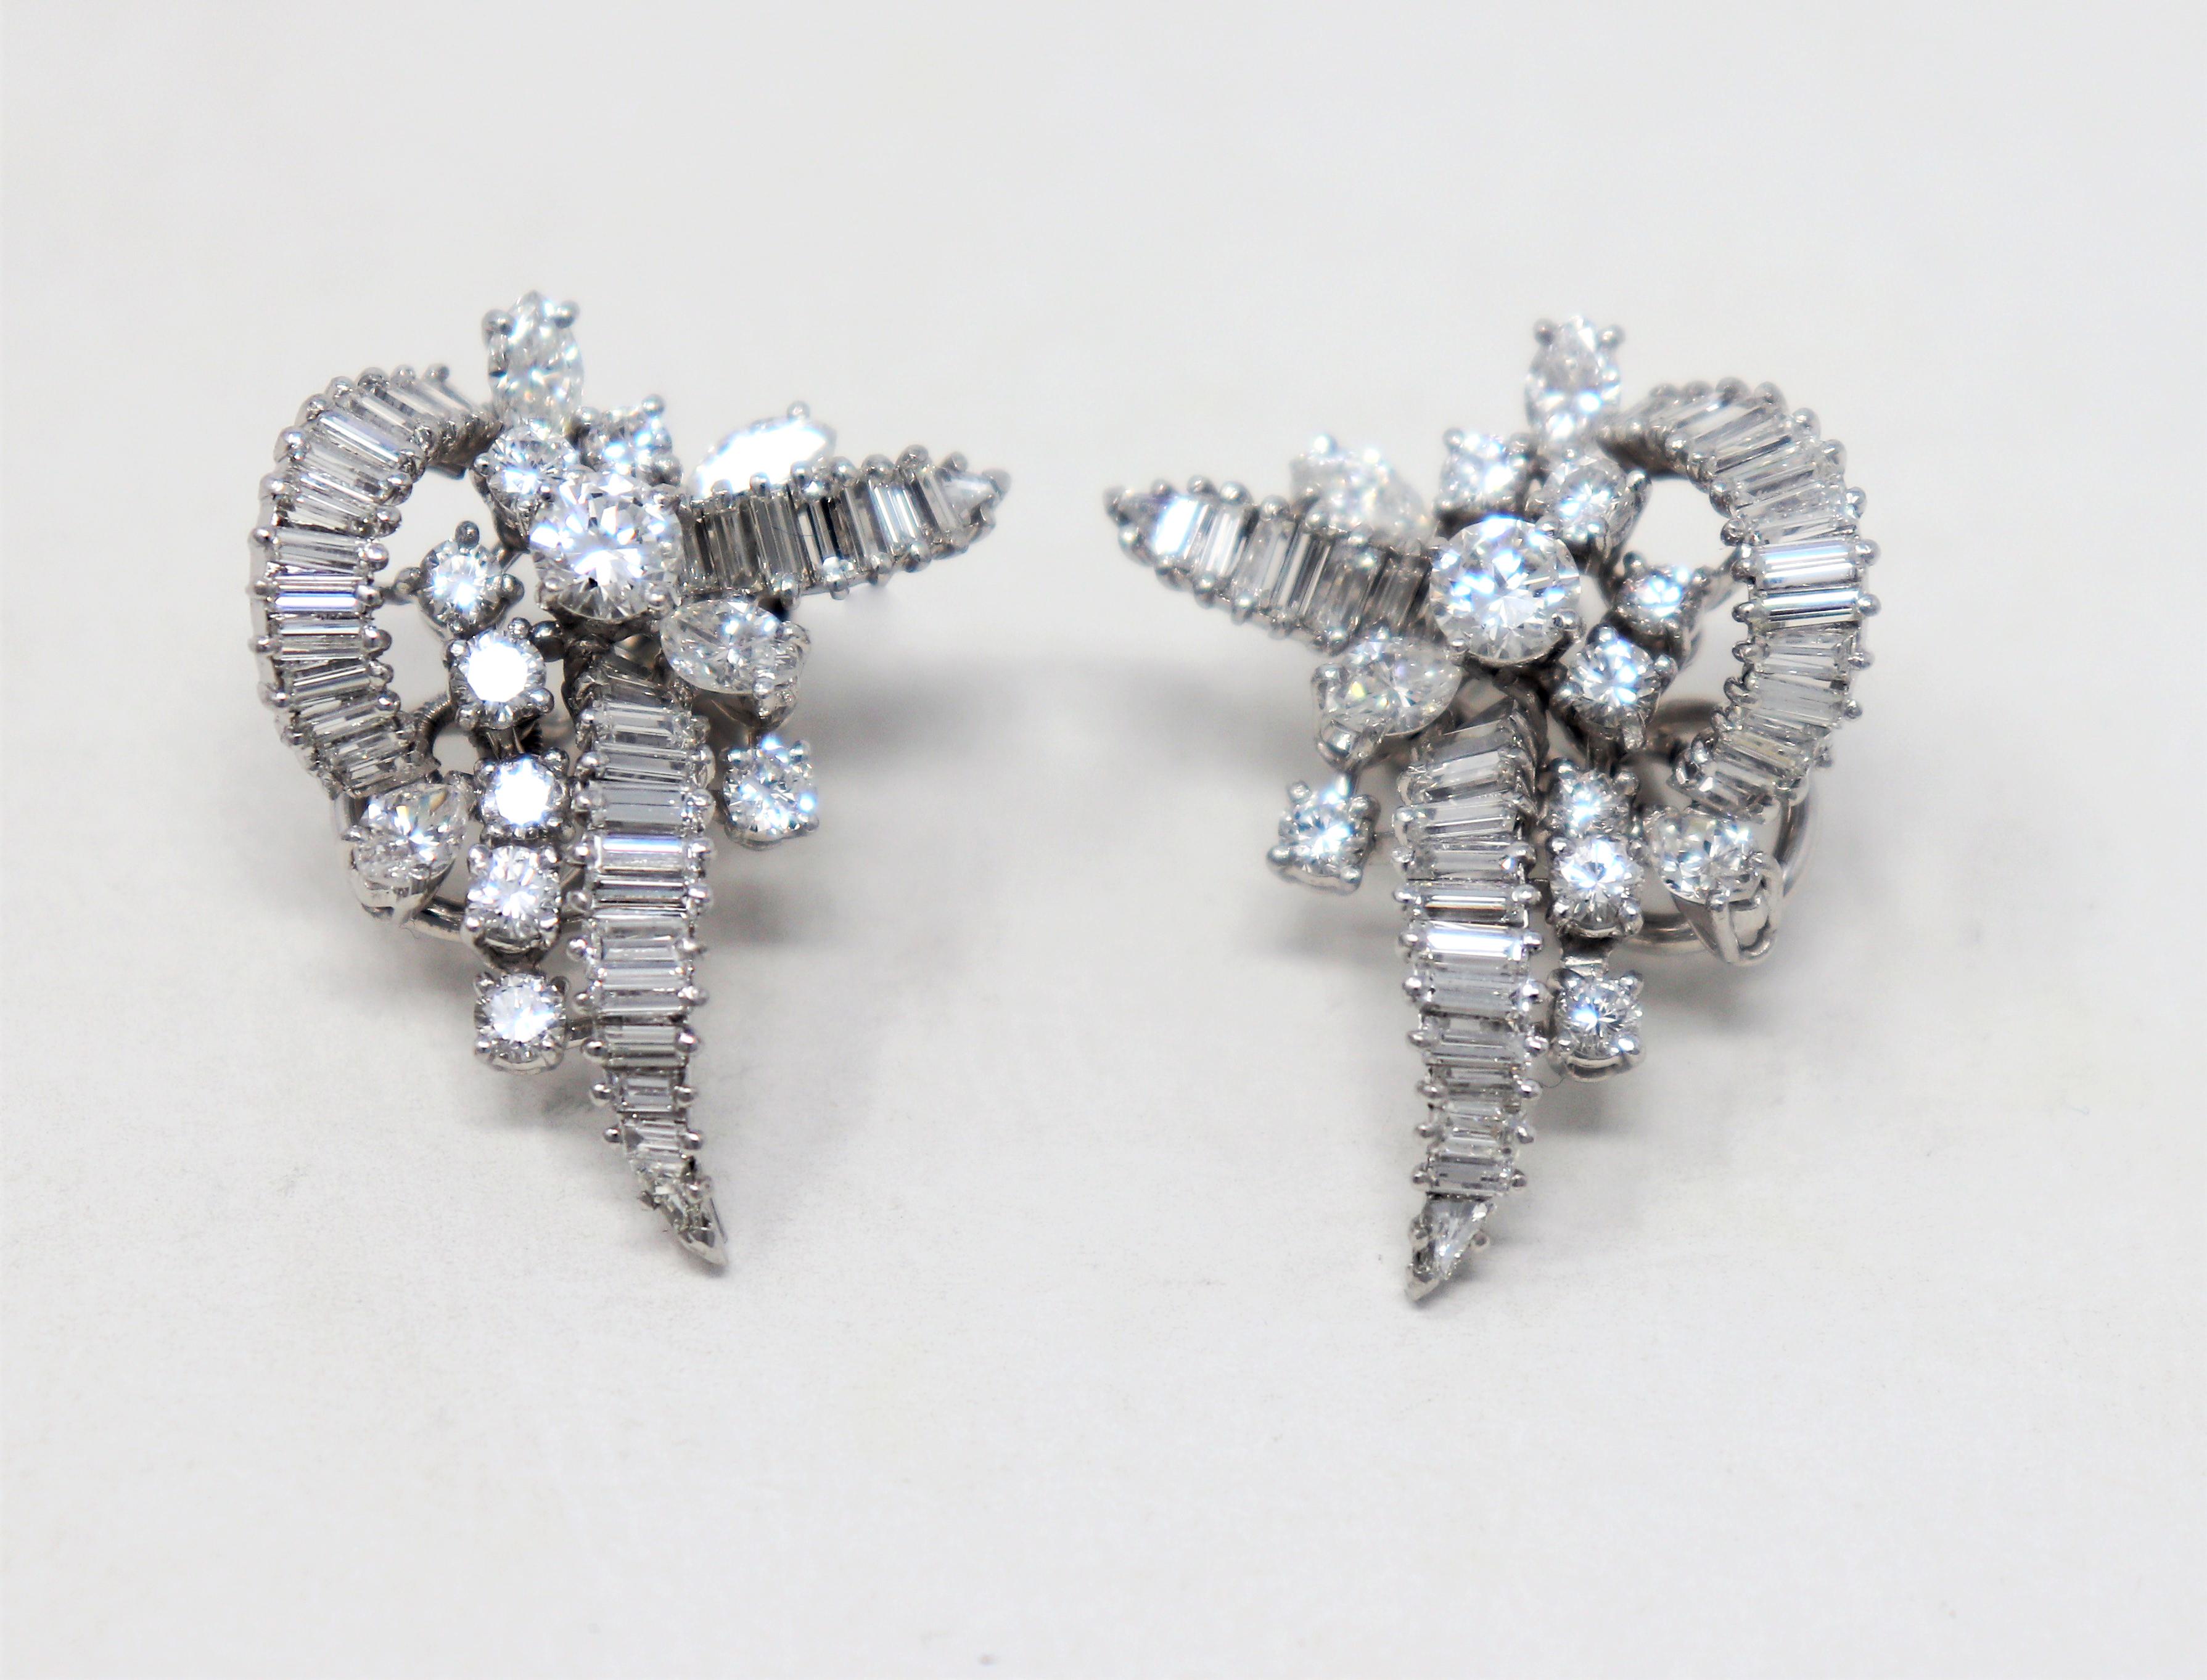 These stunningly sparkly diamond earrings are an incredible sight to see. The exquisite earrings feature a unique arrangement of assorted icy white diamonds set in polished platinum. The intricate swirls and curves of the design reflect the light,